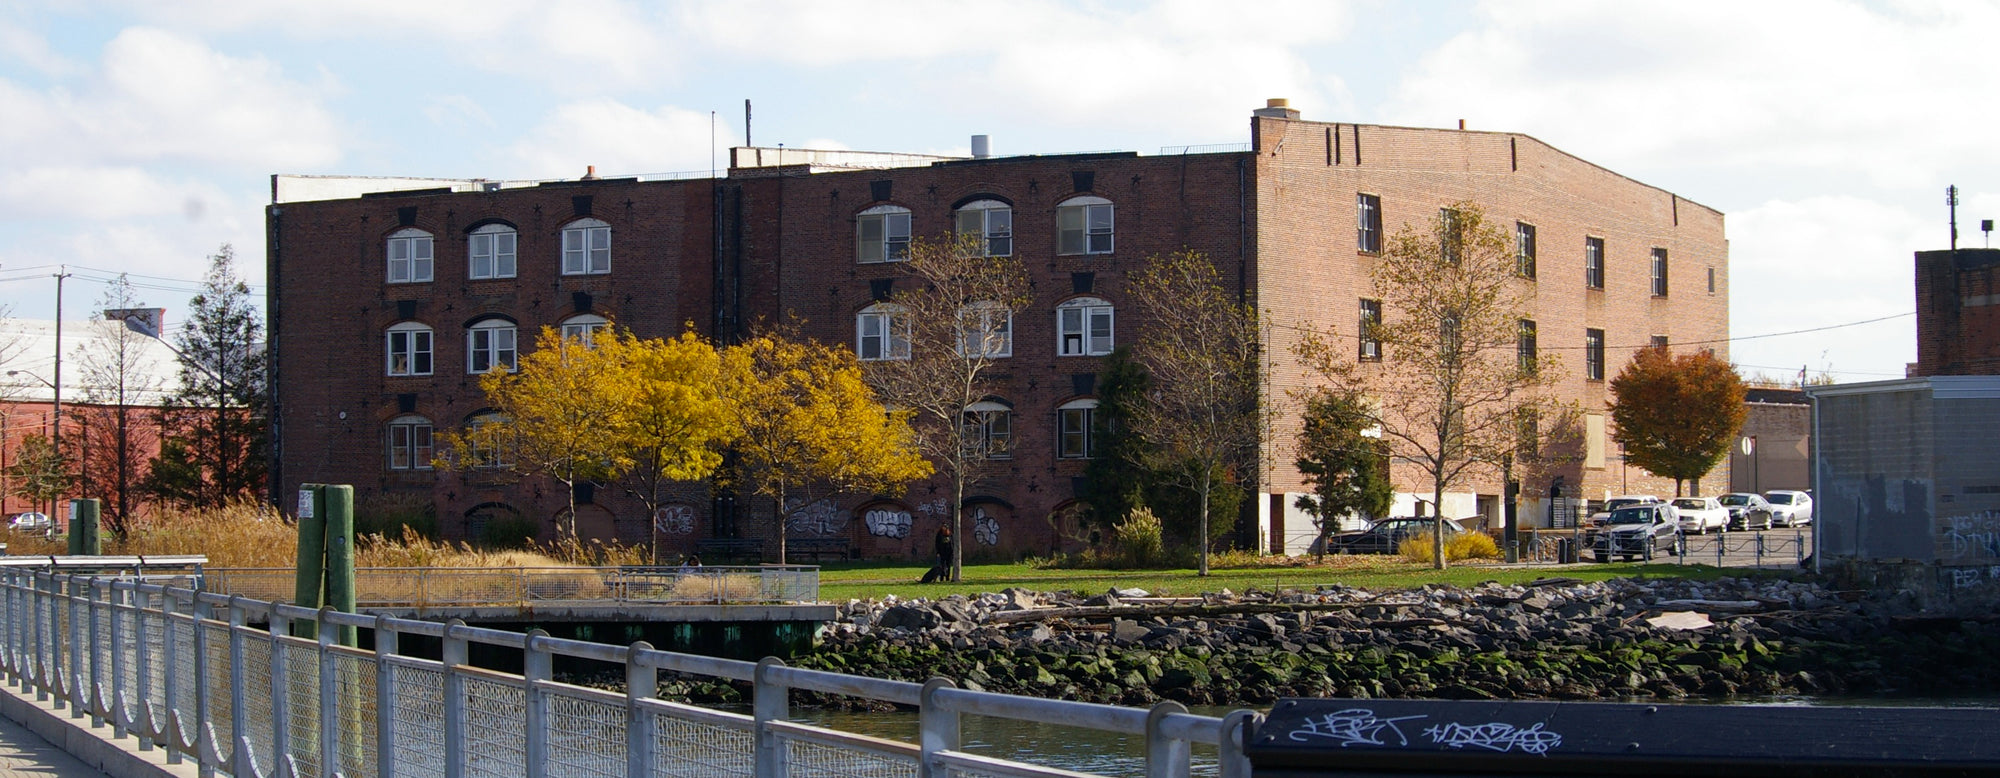 Old industrial brick building near a waterway with a railing and autumn trees.